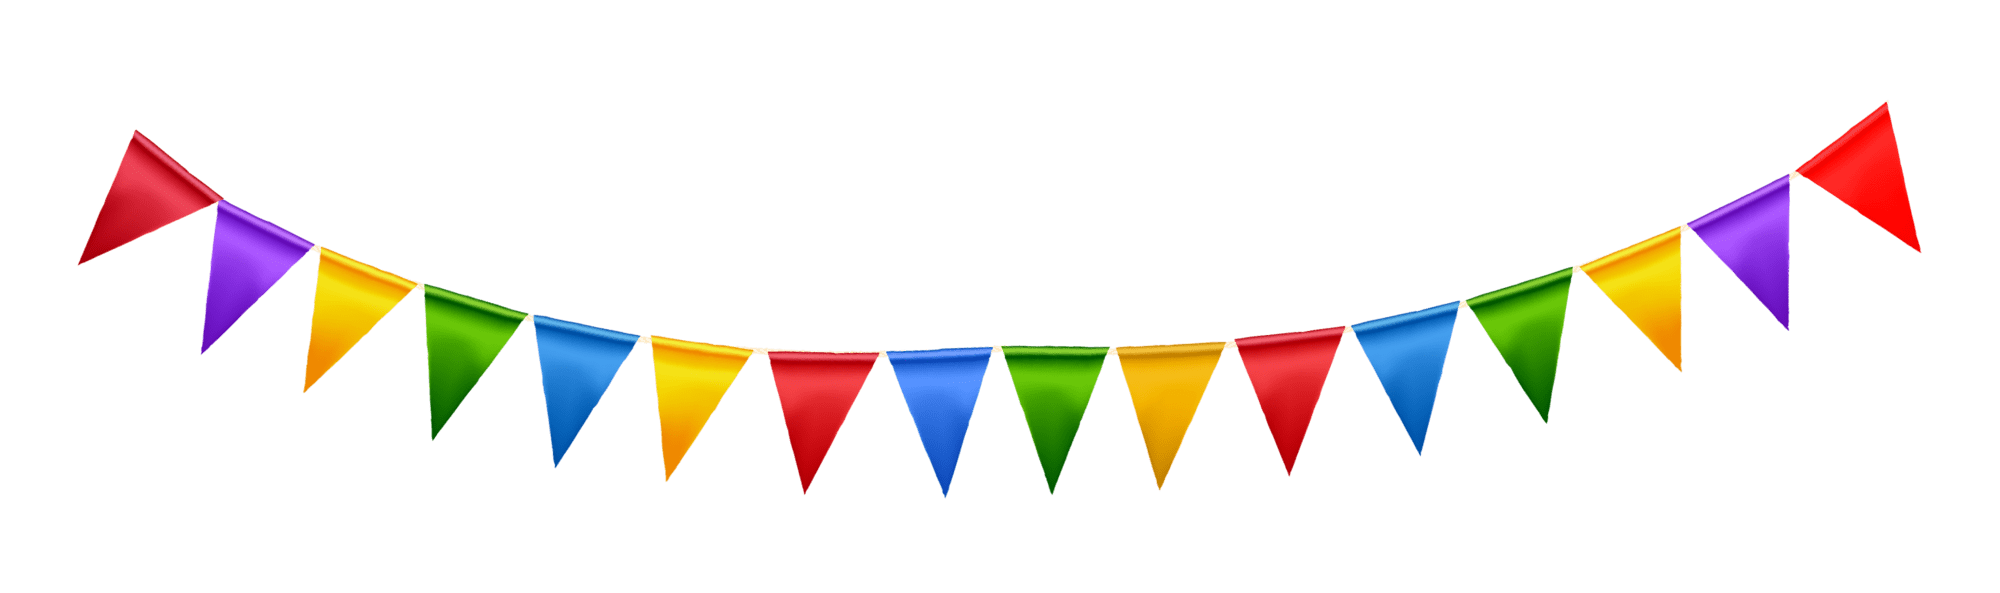 Birthday party flags image size clipart